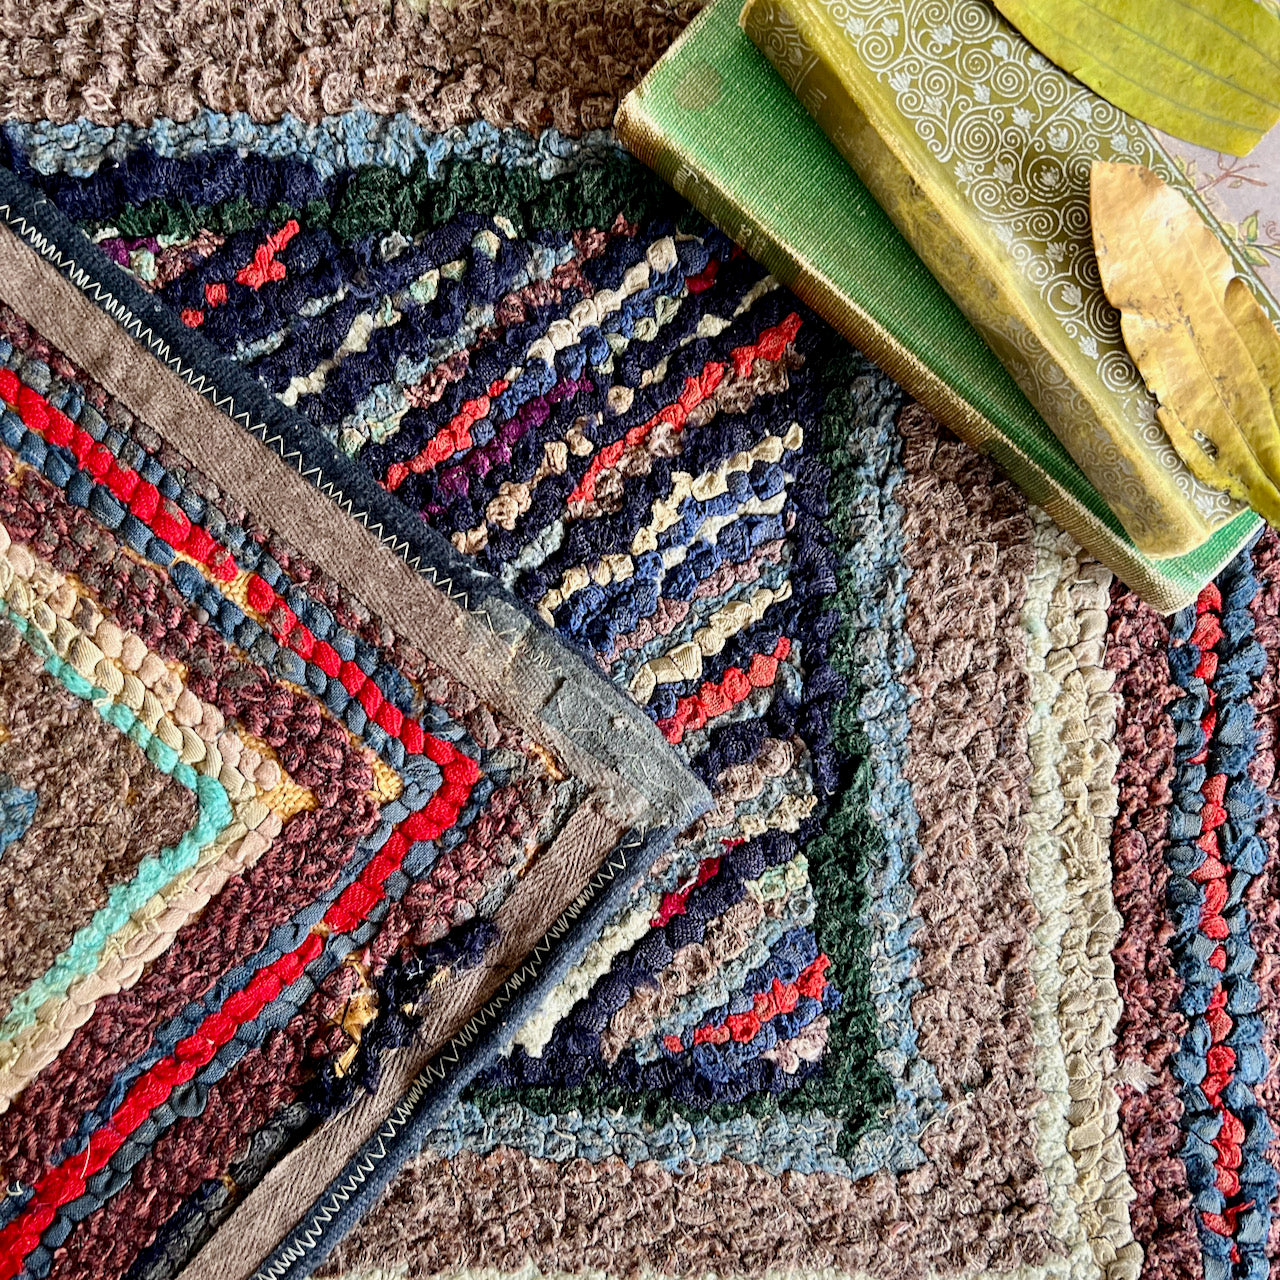 Antique Striped Latch Hook Rug from Ohio (c.1900s)